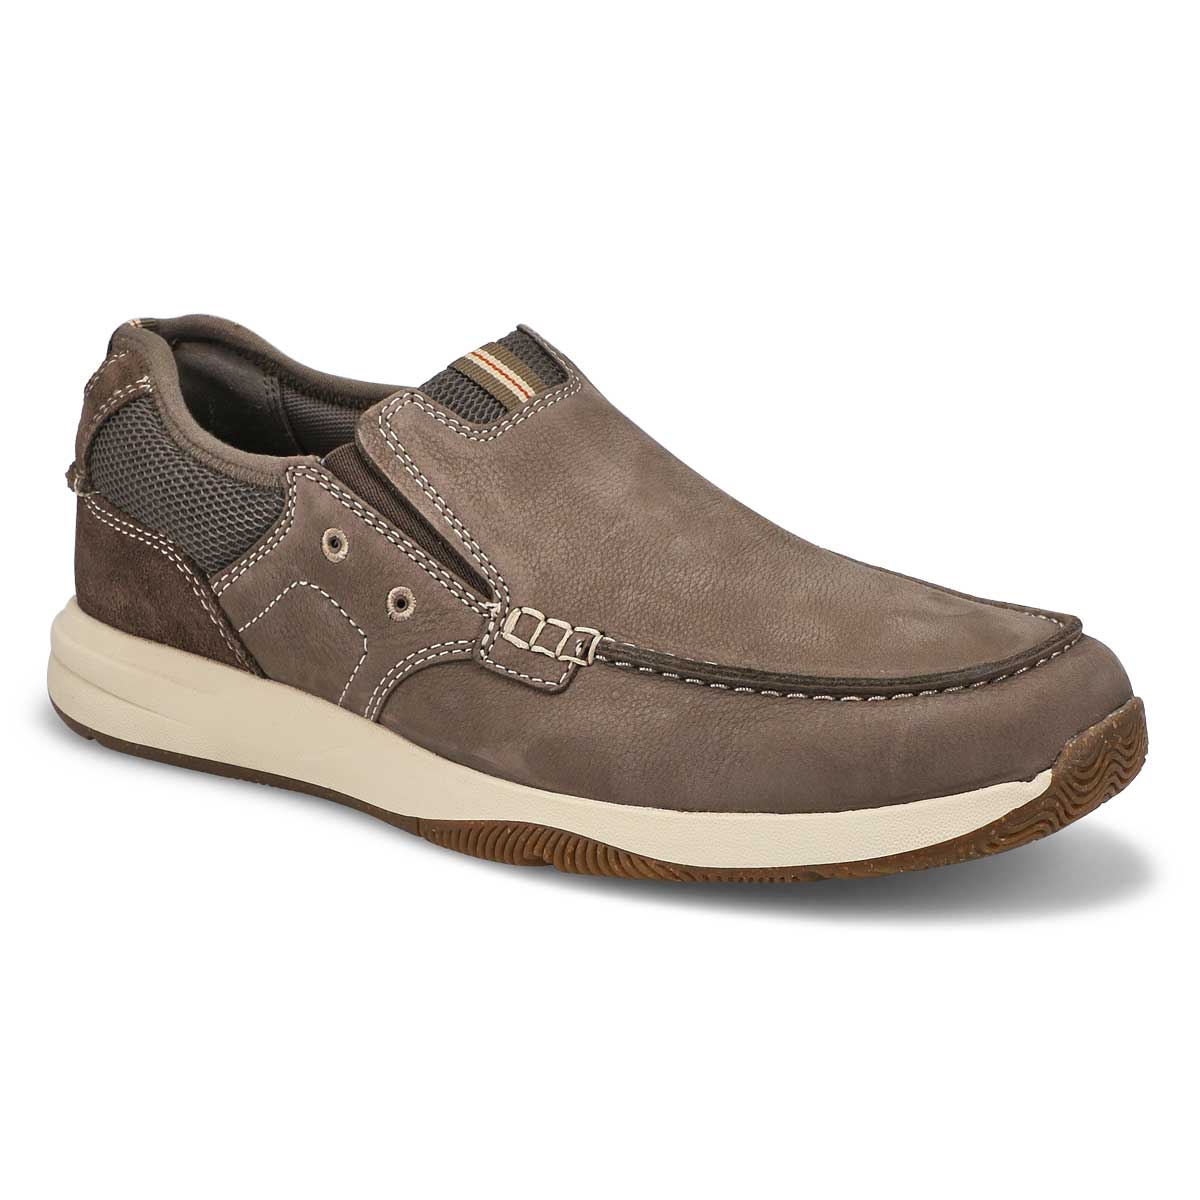 Men's Sailview Step Wide Casual Slip On Loafer - Taupe